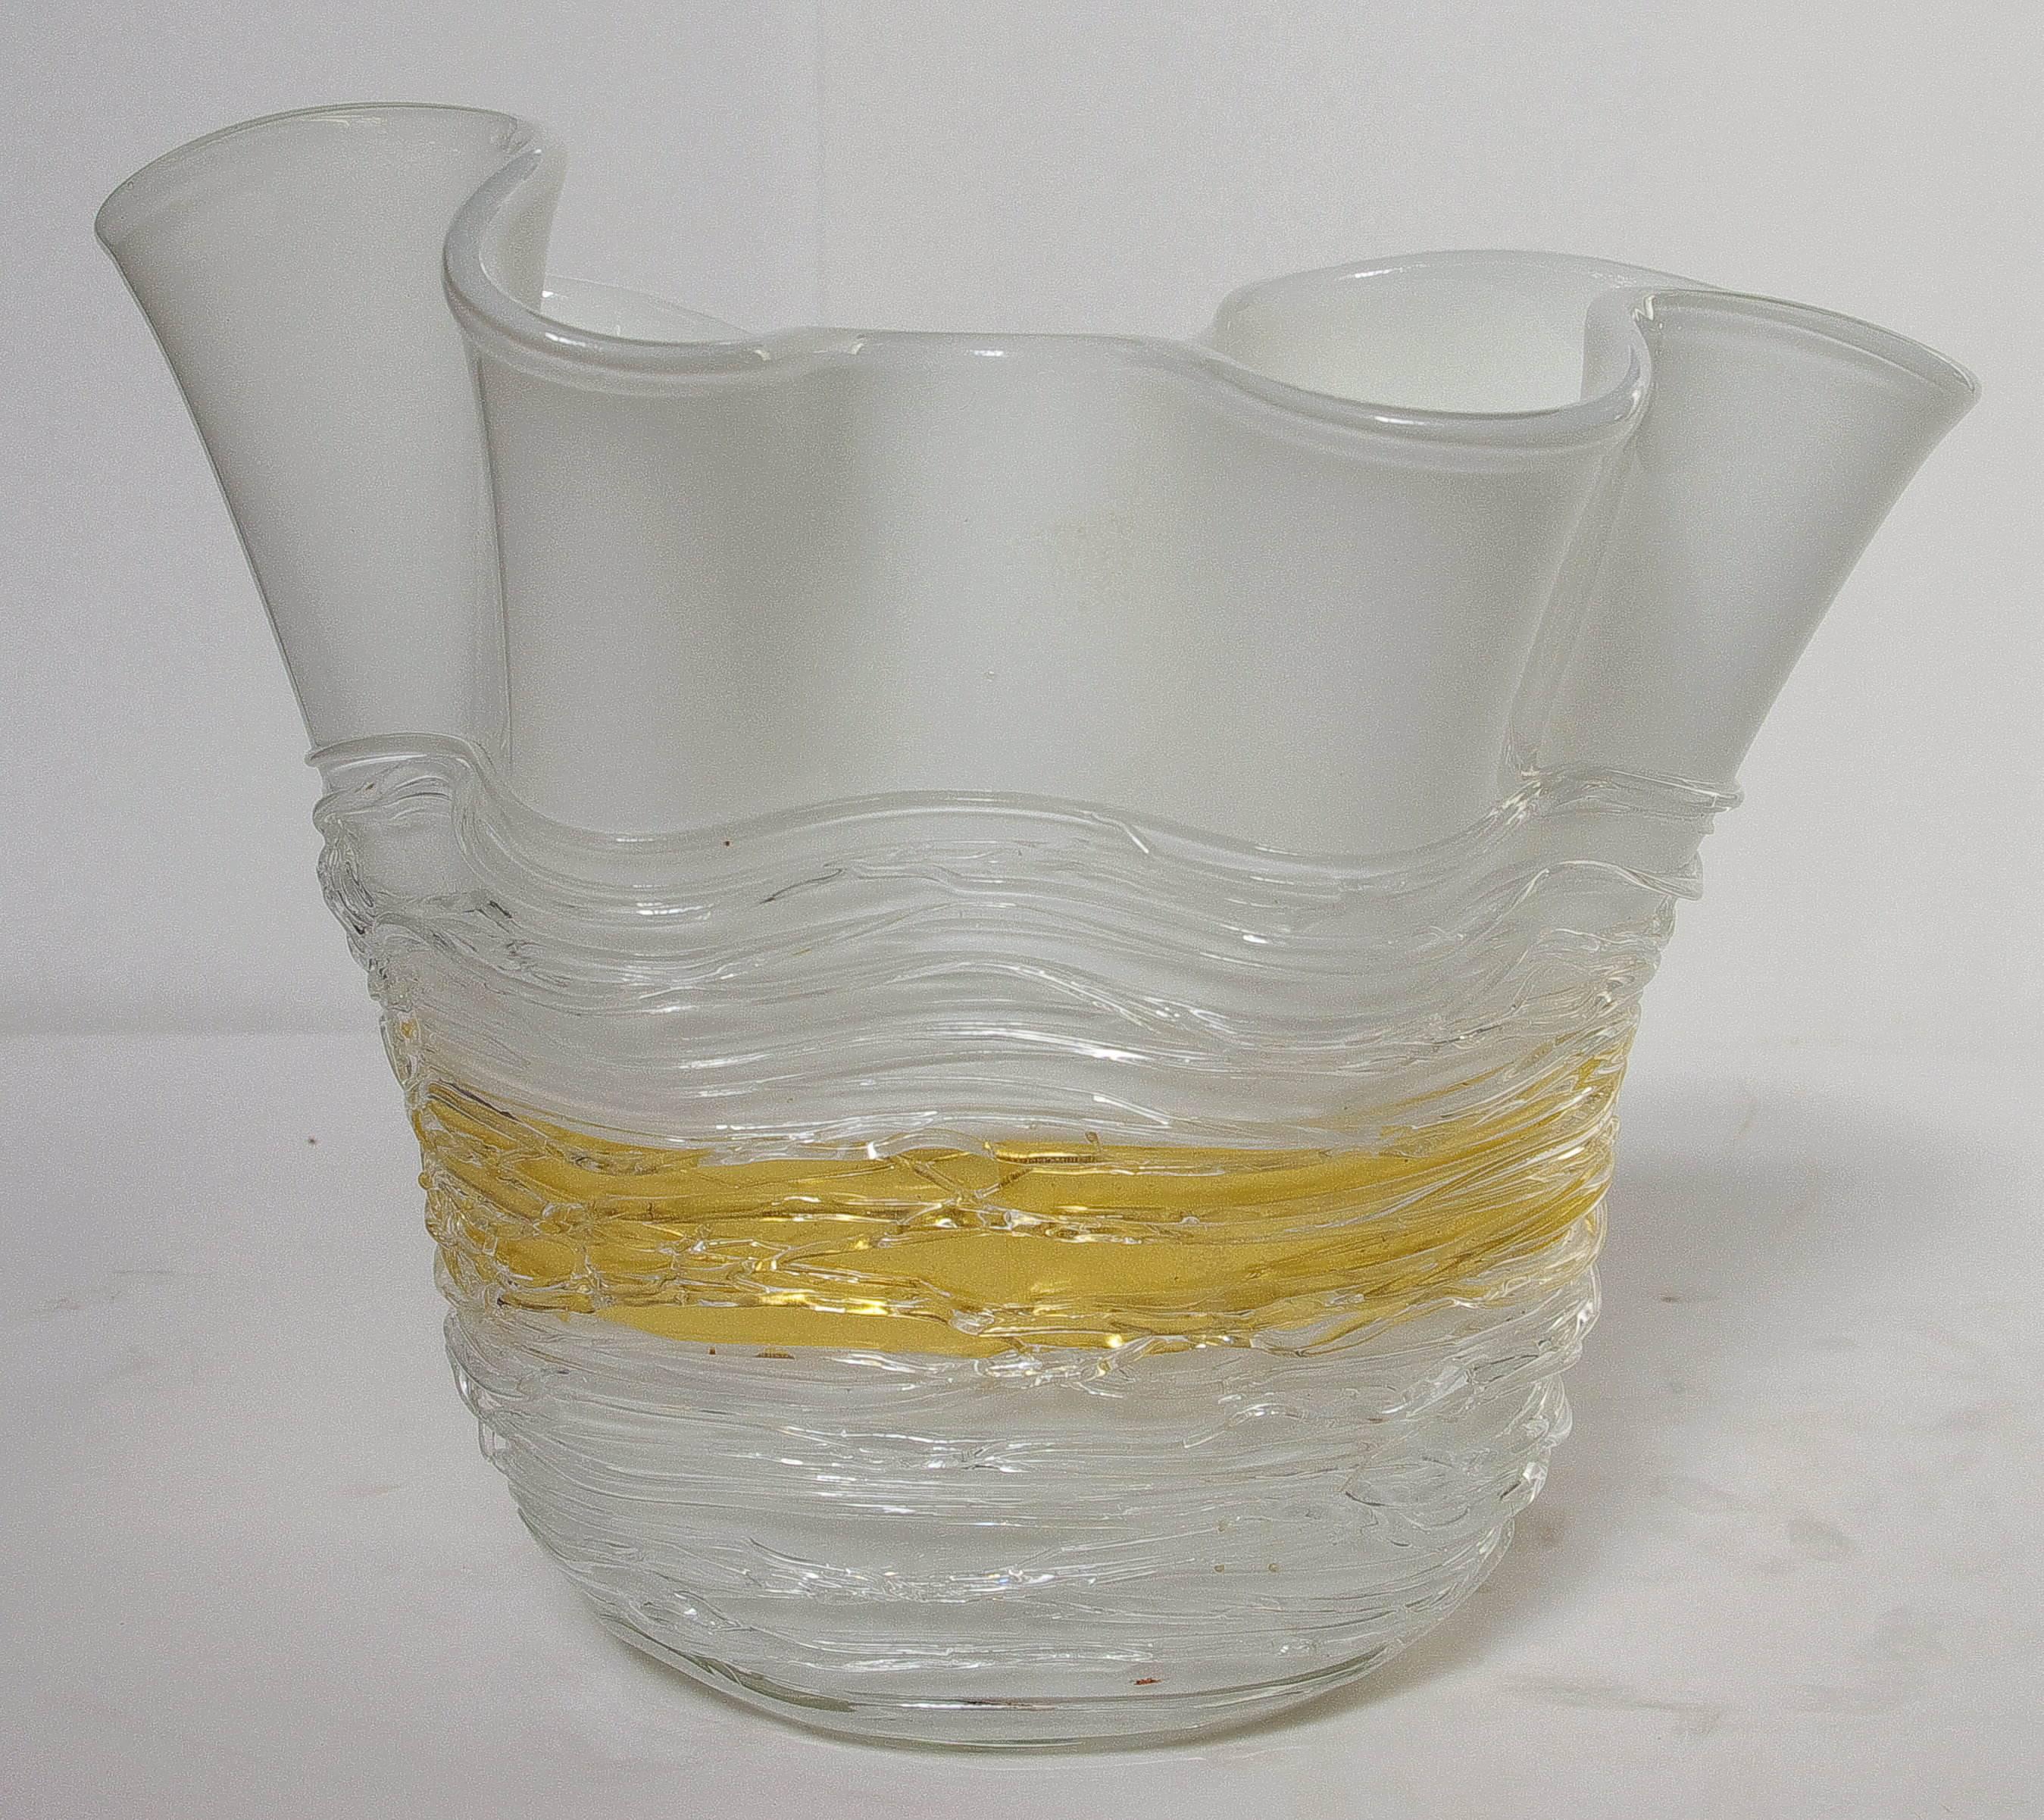 Vintage Italian white and gold Murano glass vase by Camozzo, signed on the base
Made in Italy in the 1960’s
Height: 10 inches / Diameter: 13.5 inches
1 in stock in Palm Springs currently ON 40% OFF SALE for $749!!!
Order Reference #: FABIOLTD